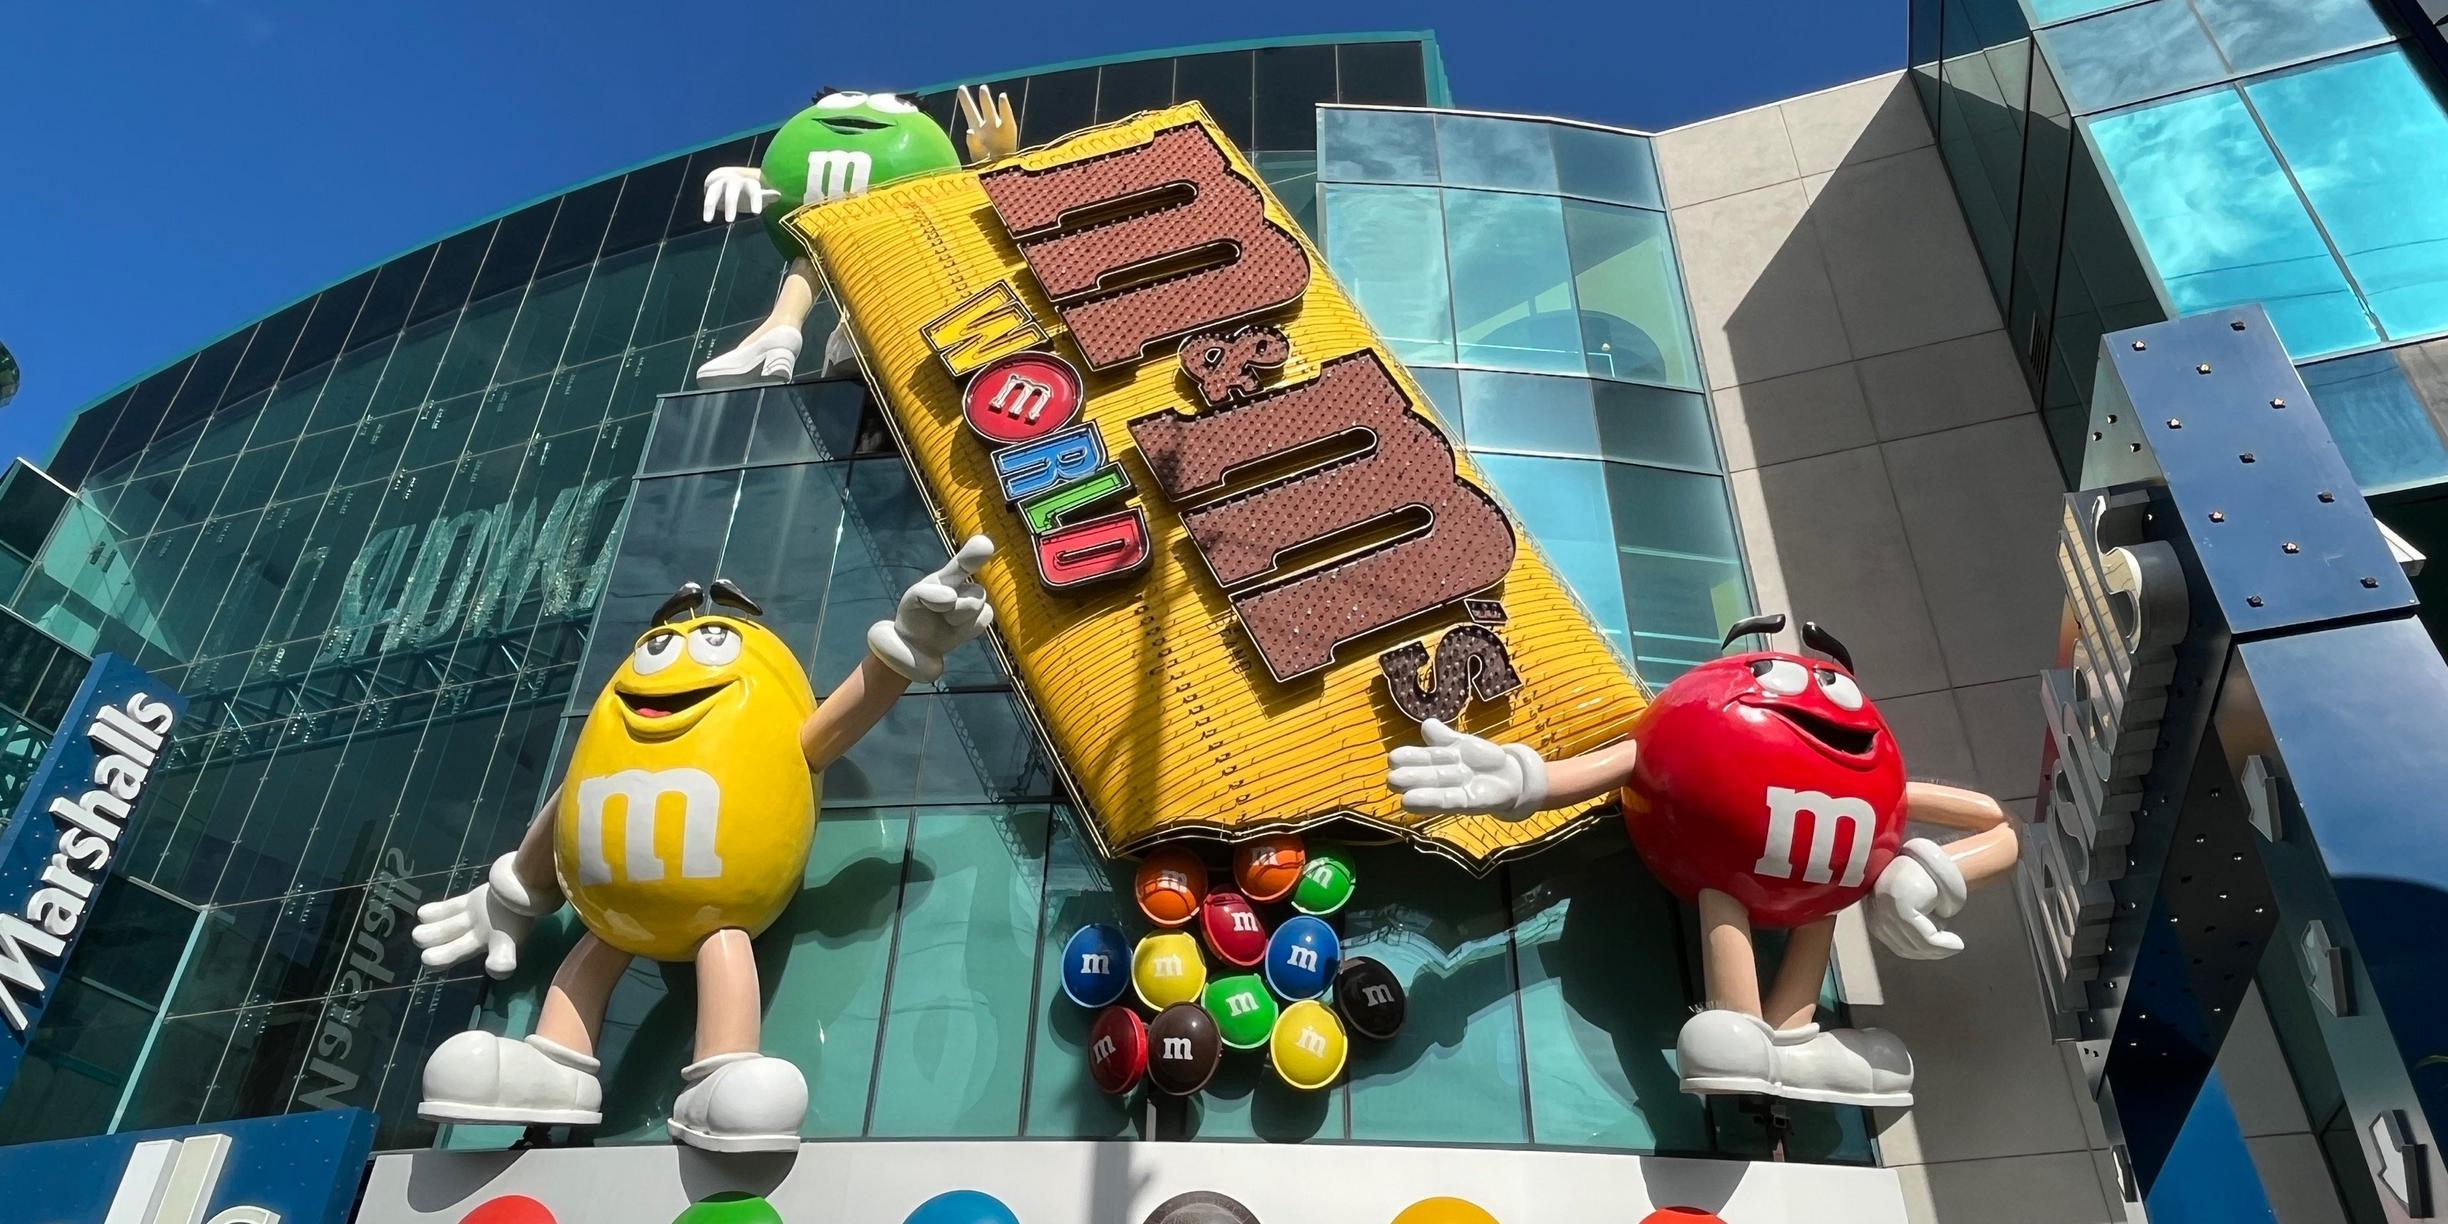 Las Vegas NV, Nevada - M&M's World Candy and Gift Store